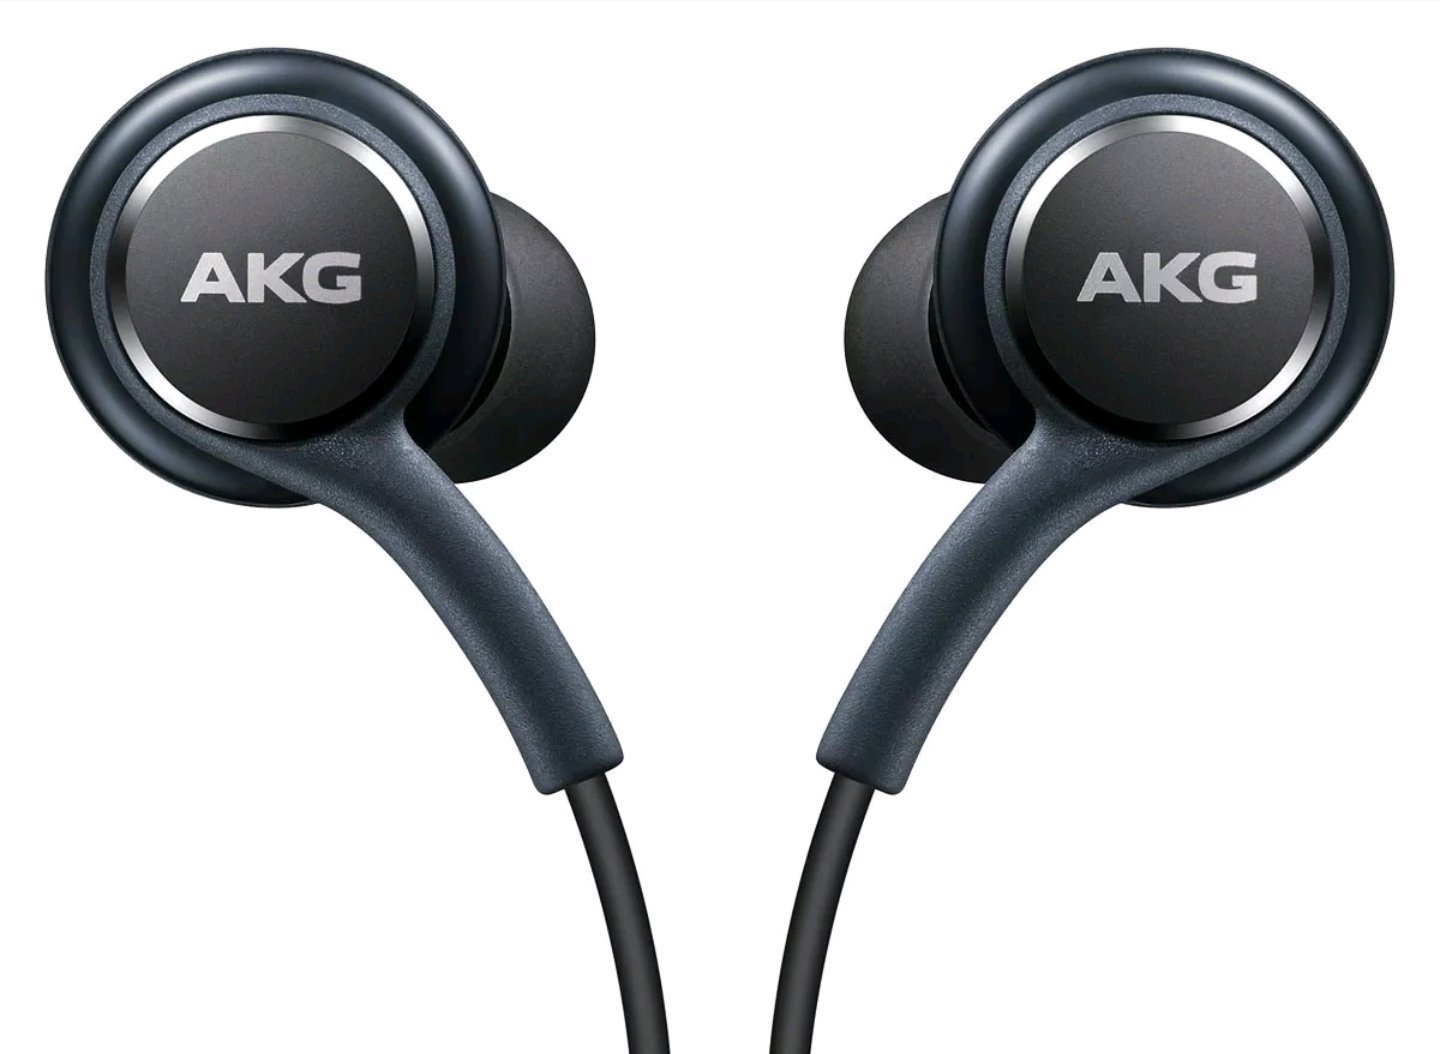 Samsung OEM Stereo Headphones w/Microphone for  Galaxy S8 S9 S8 Plus S9 Plus Note 8 - Designed by AKG - 100% Original